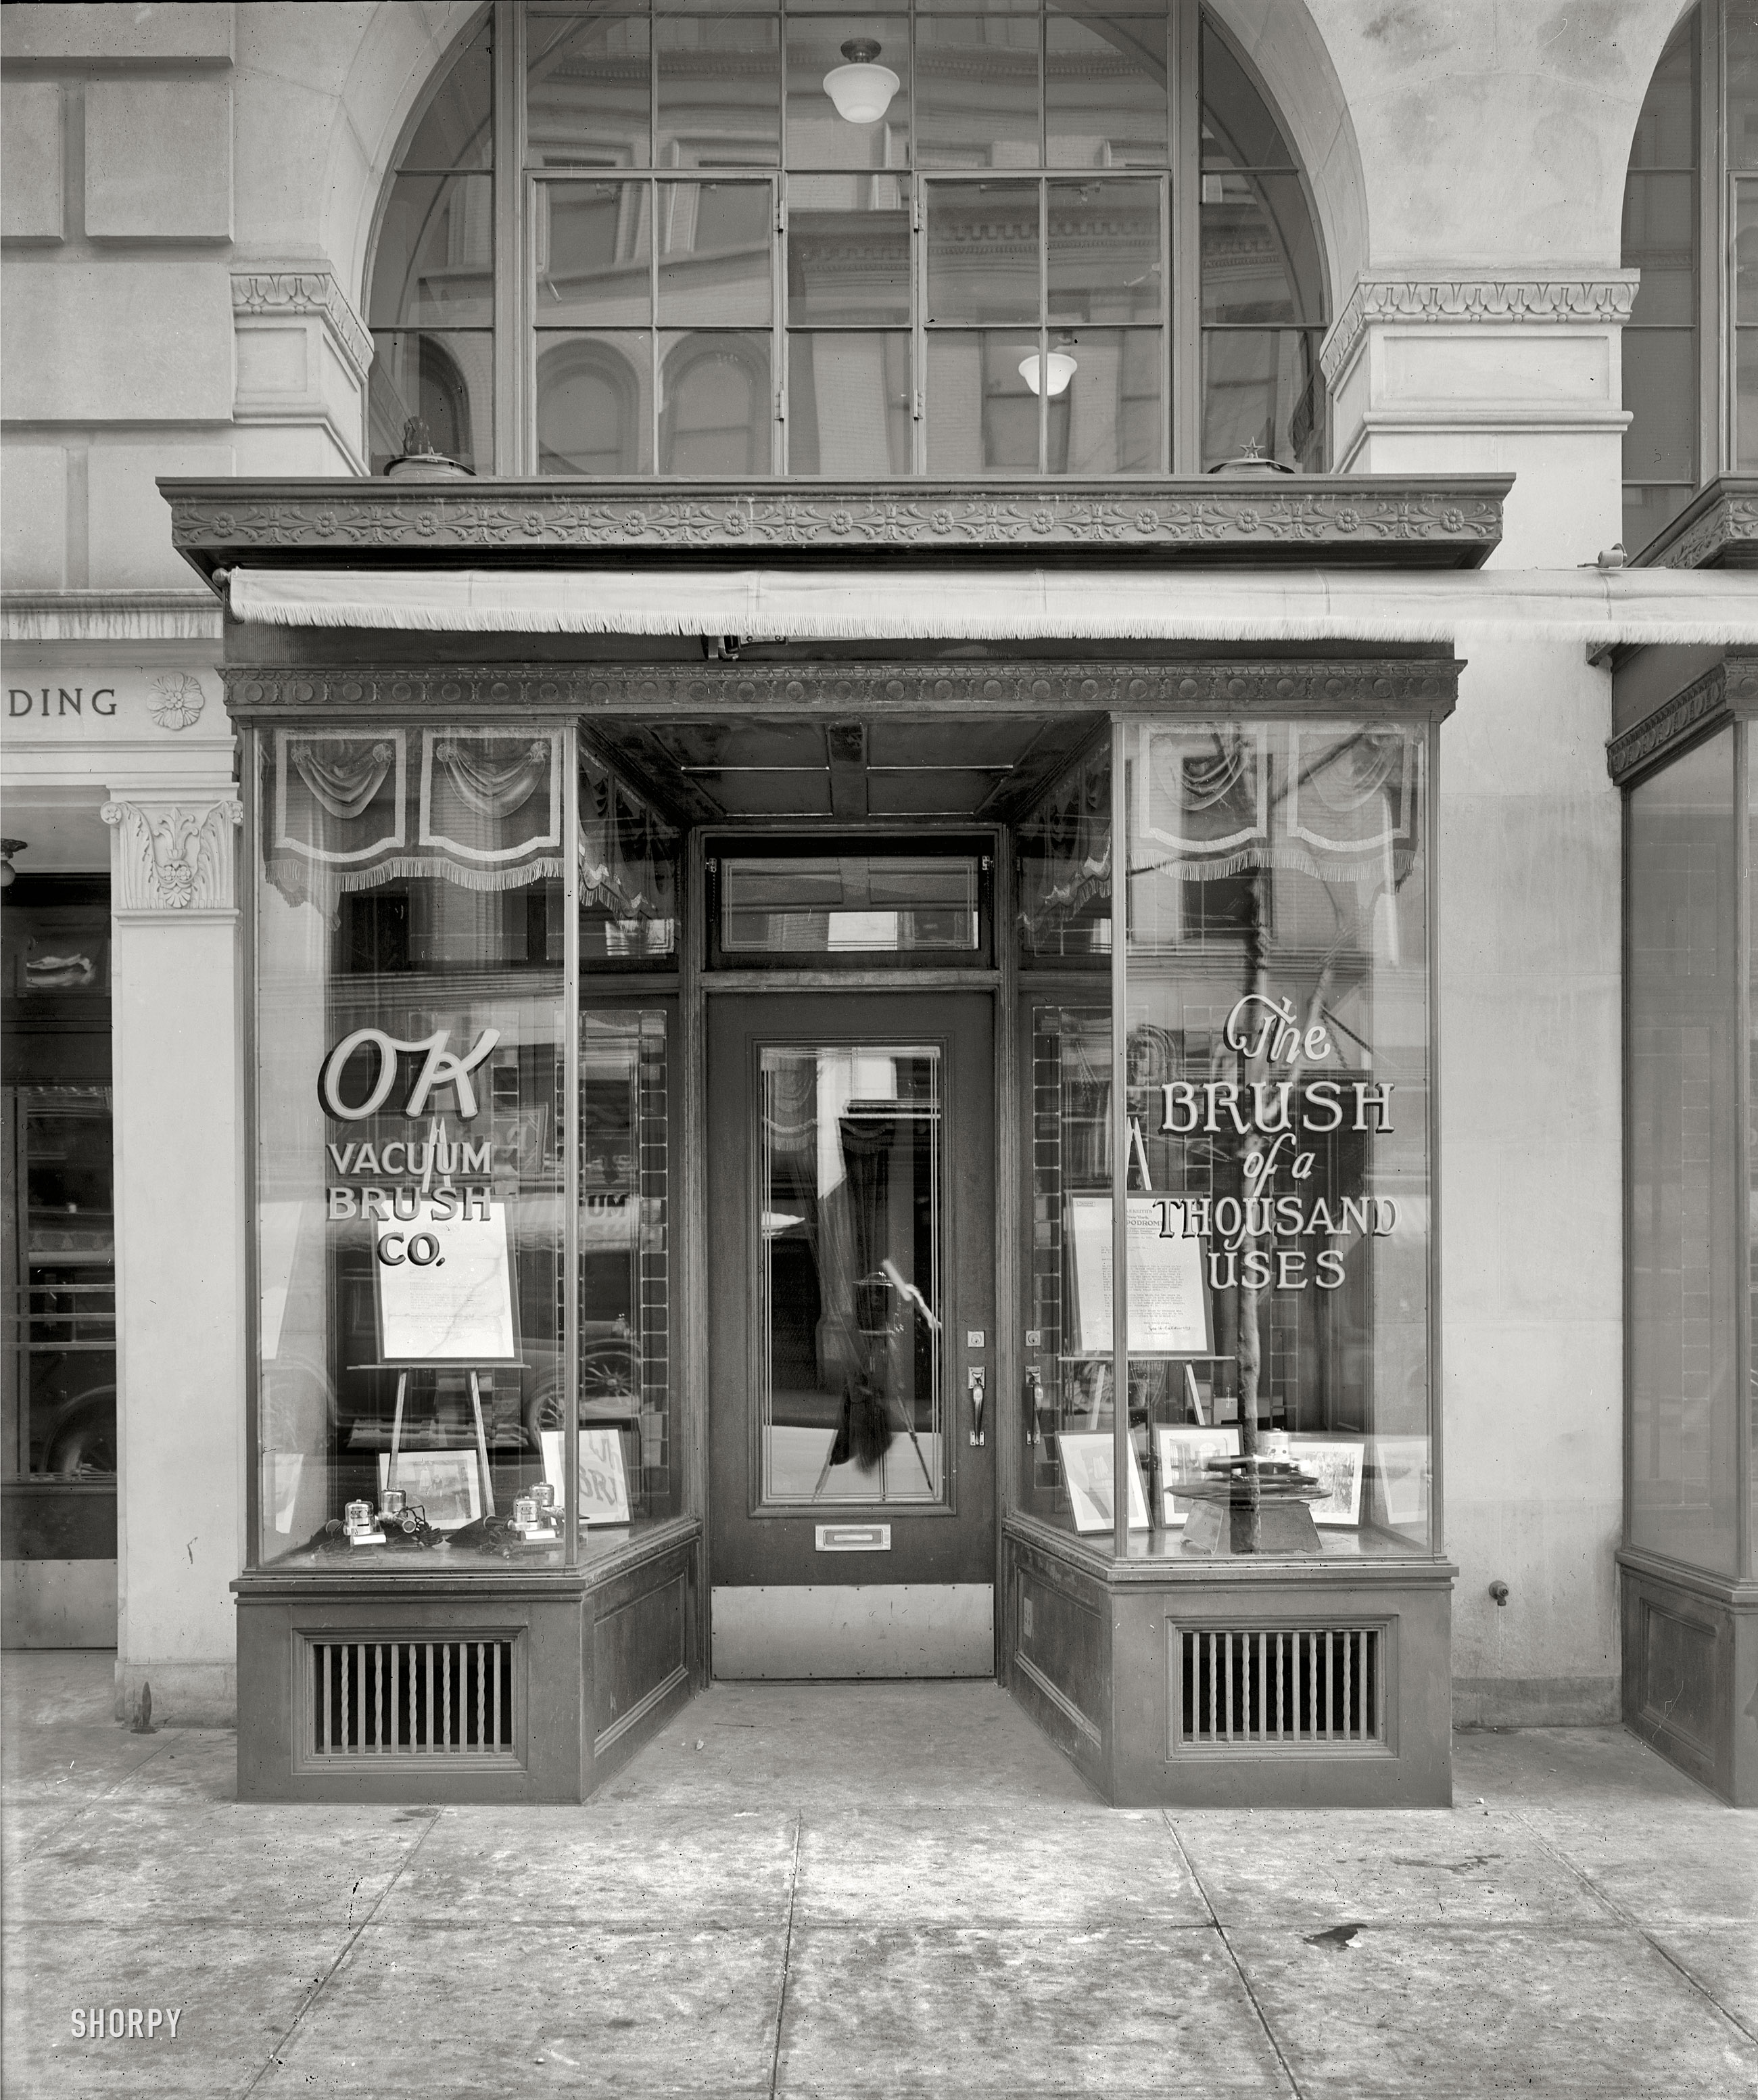 Washington, D.C., circa 1925. "OK Brush Co., exterior." When constrained cleaning budgets preclude the purchase of the best in bristles, consider settling for an OK Vacuum Brush. National Photo Company glass negative. View full size.